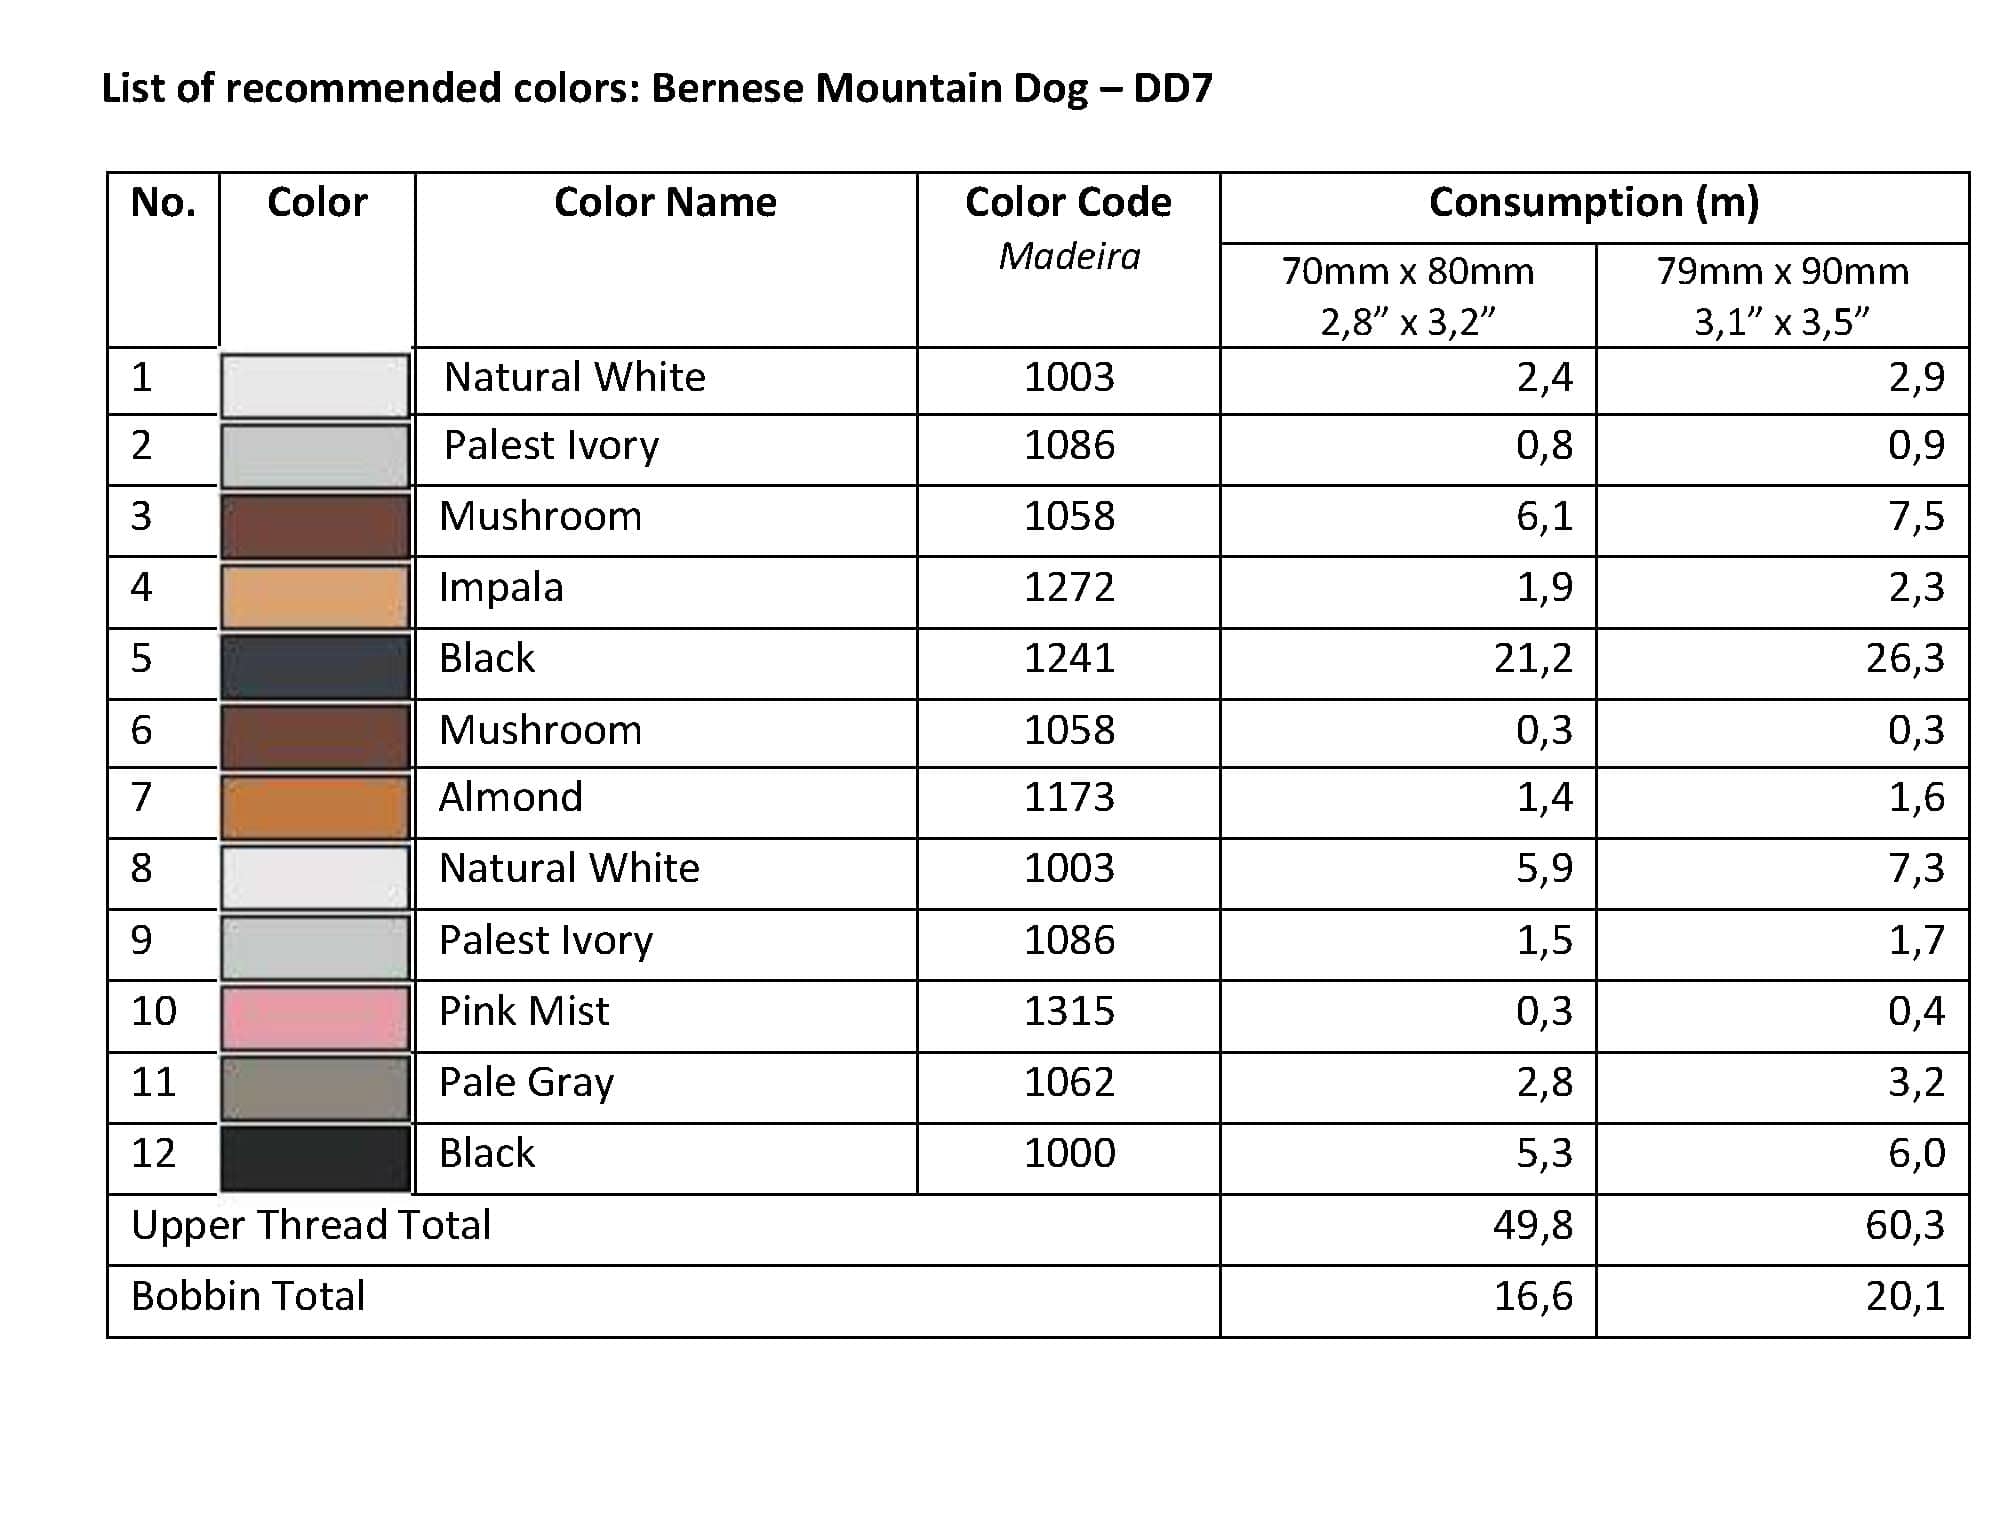 List of Recommended Colors - Bernese Mountain Dog DD7